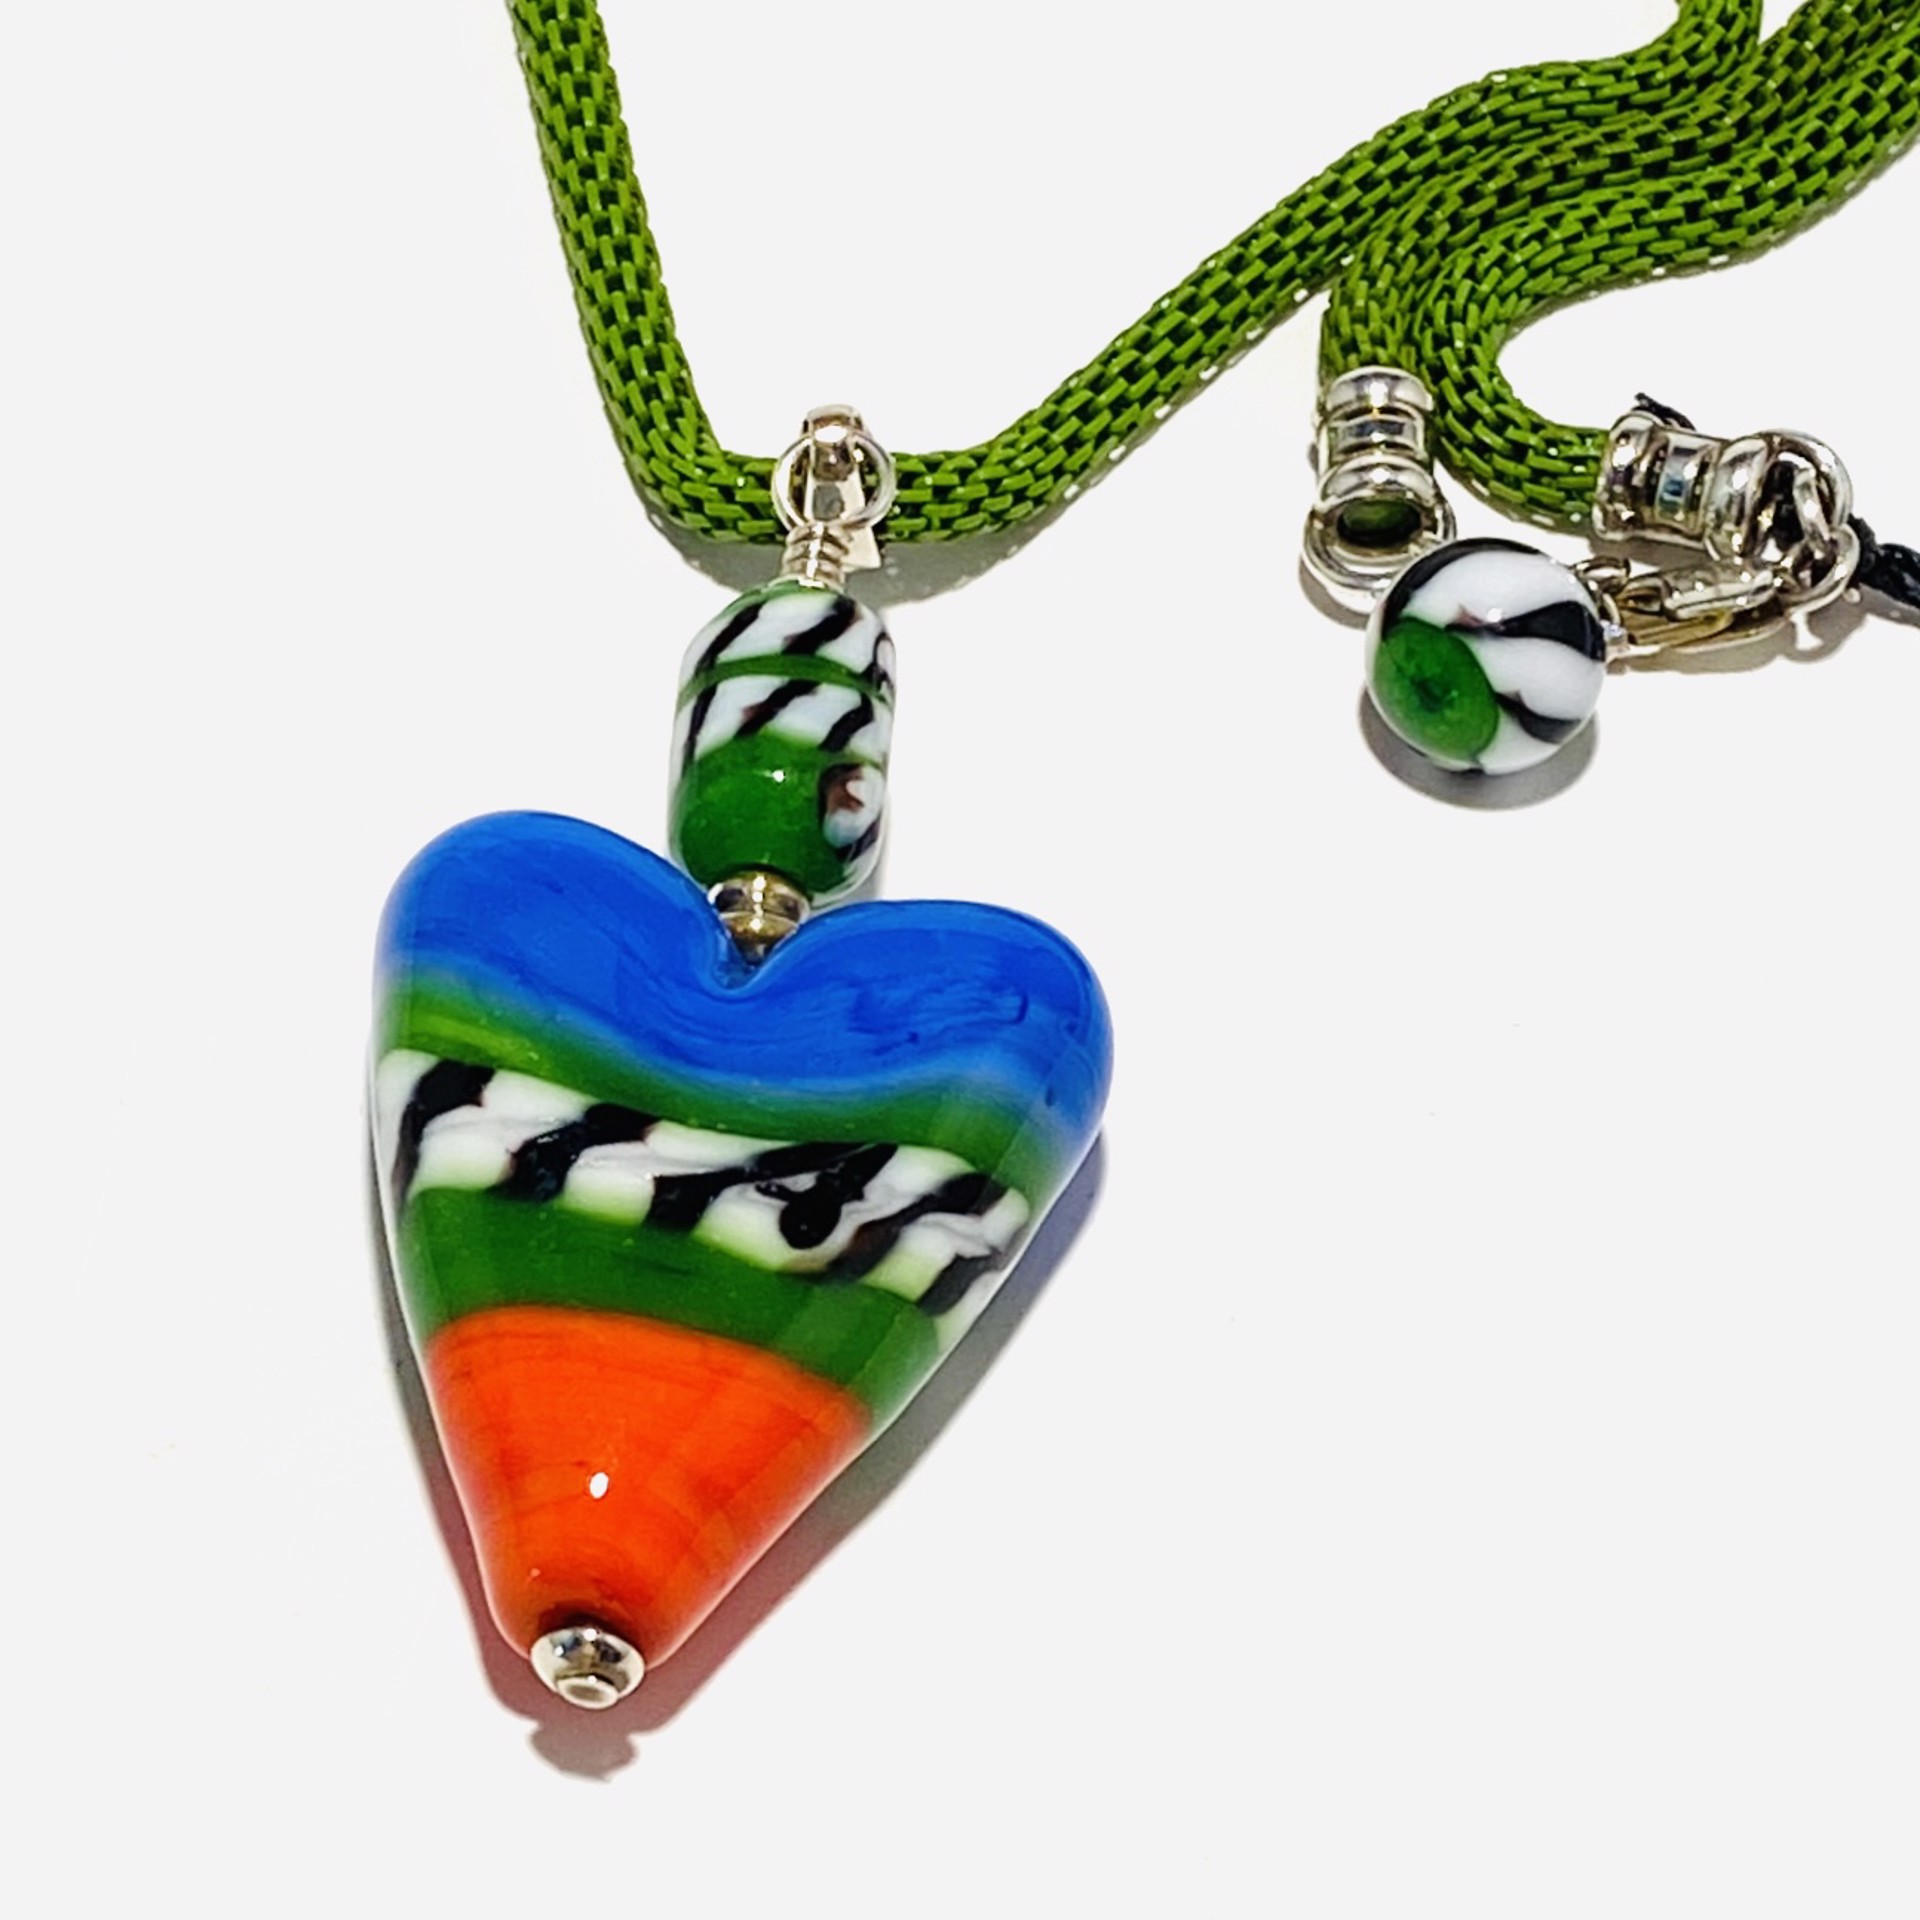 LS23-6A Multicolored Heart Mesh Chain Necklace by Linda Sacra